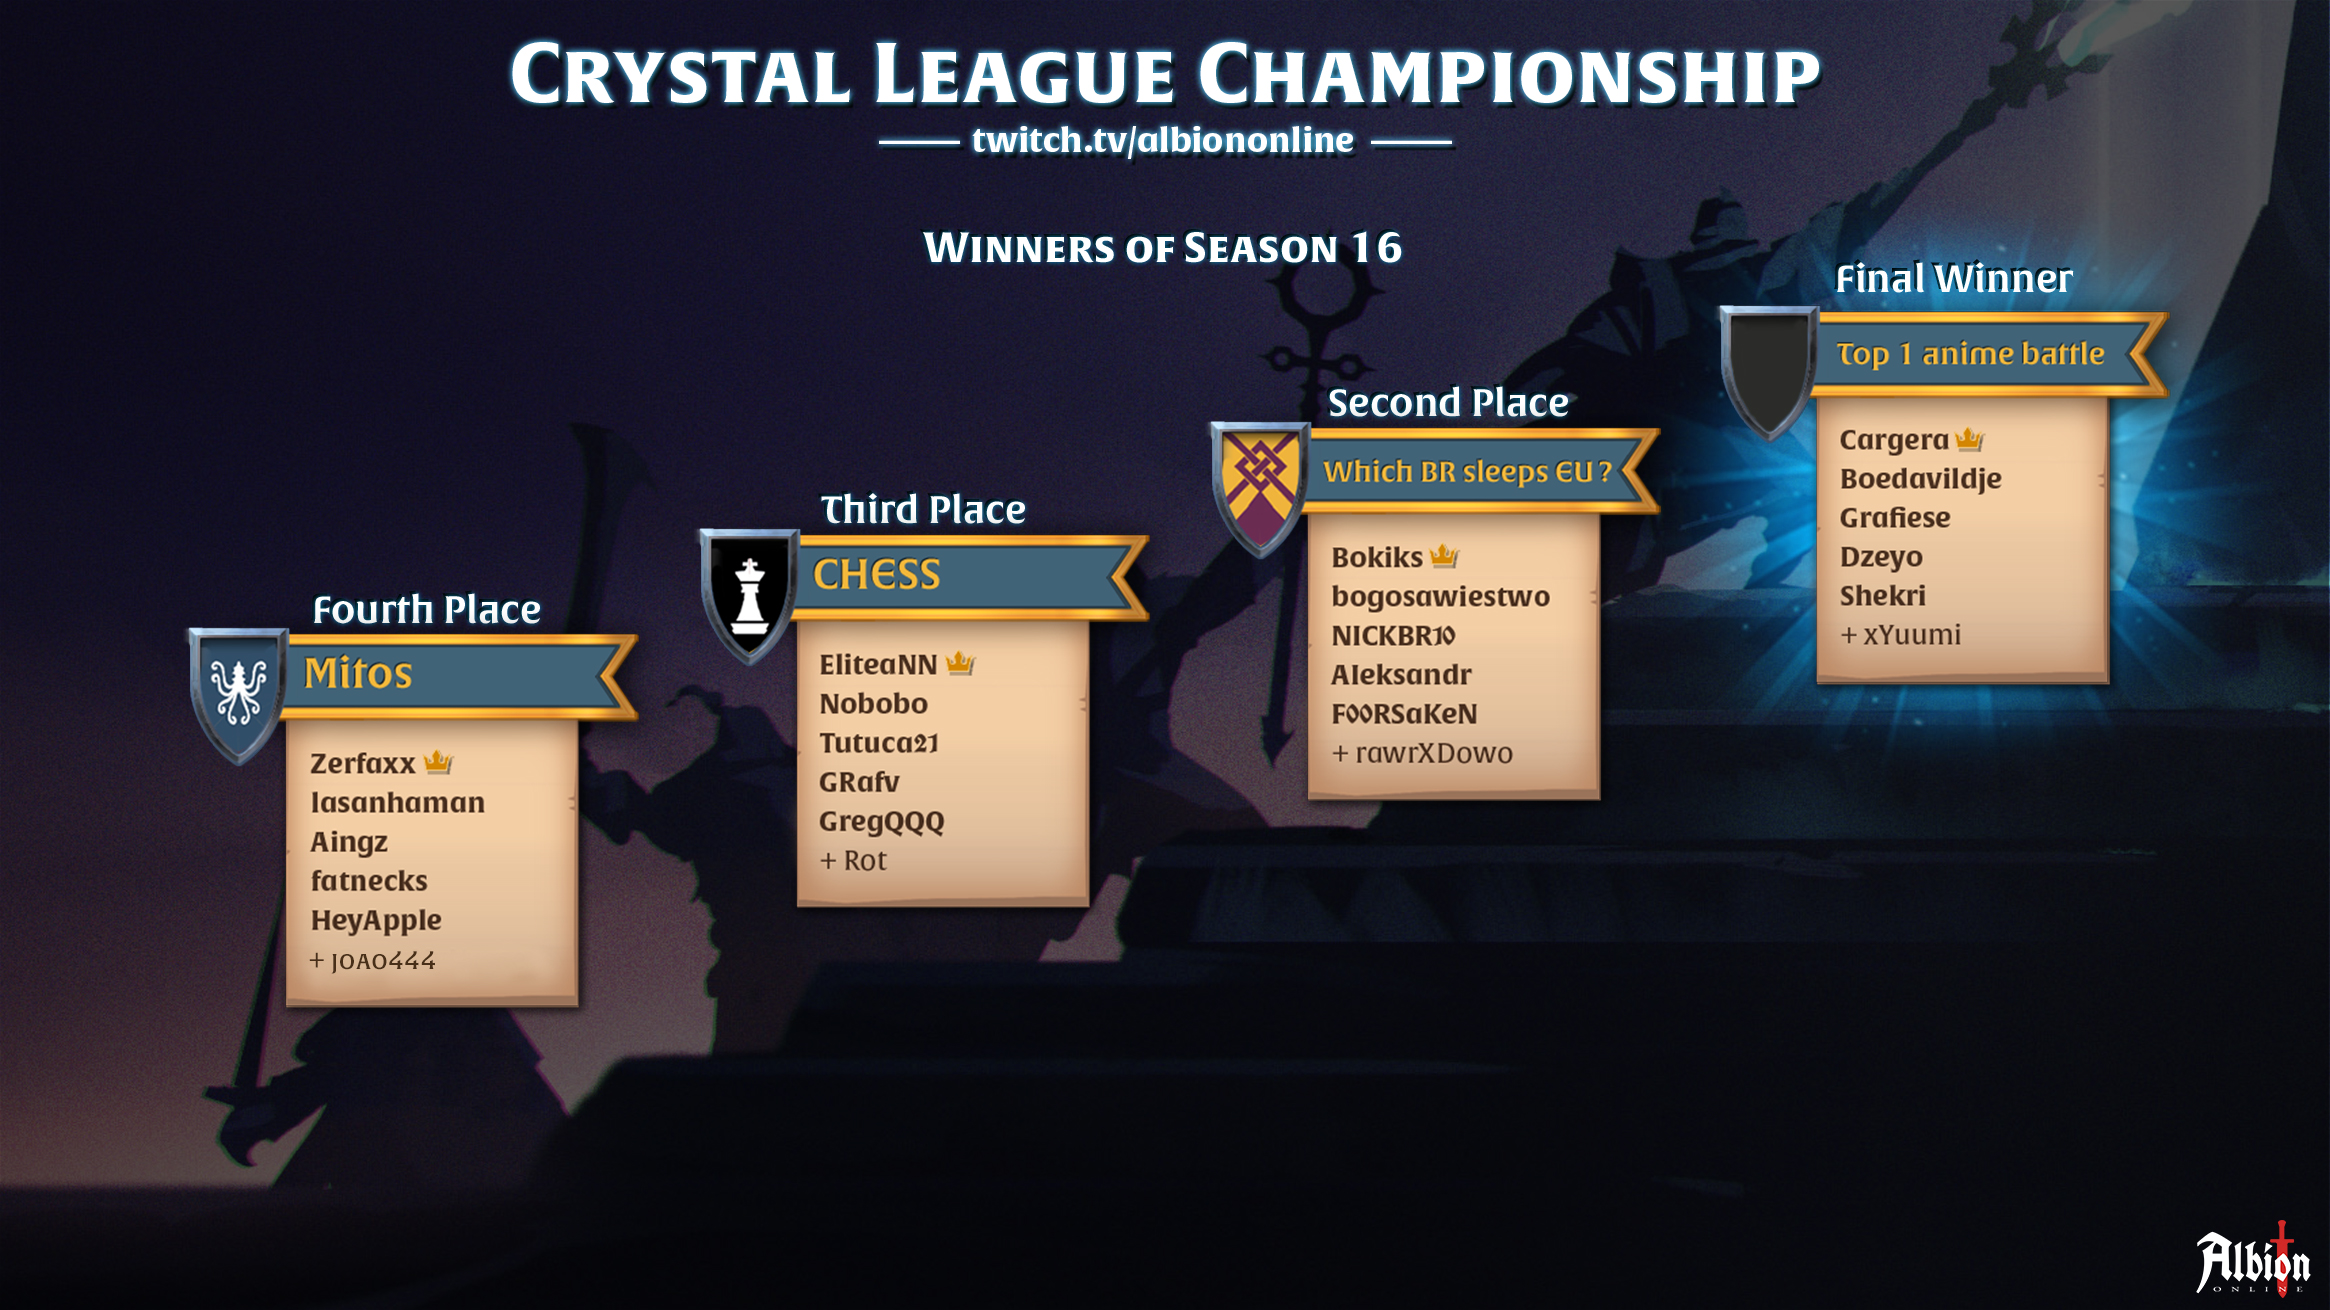 Albion Online Season 13 Crystal League Championship in September